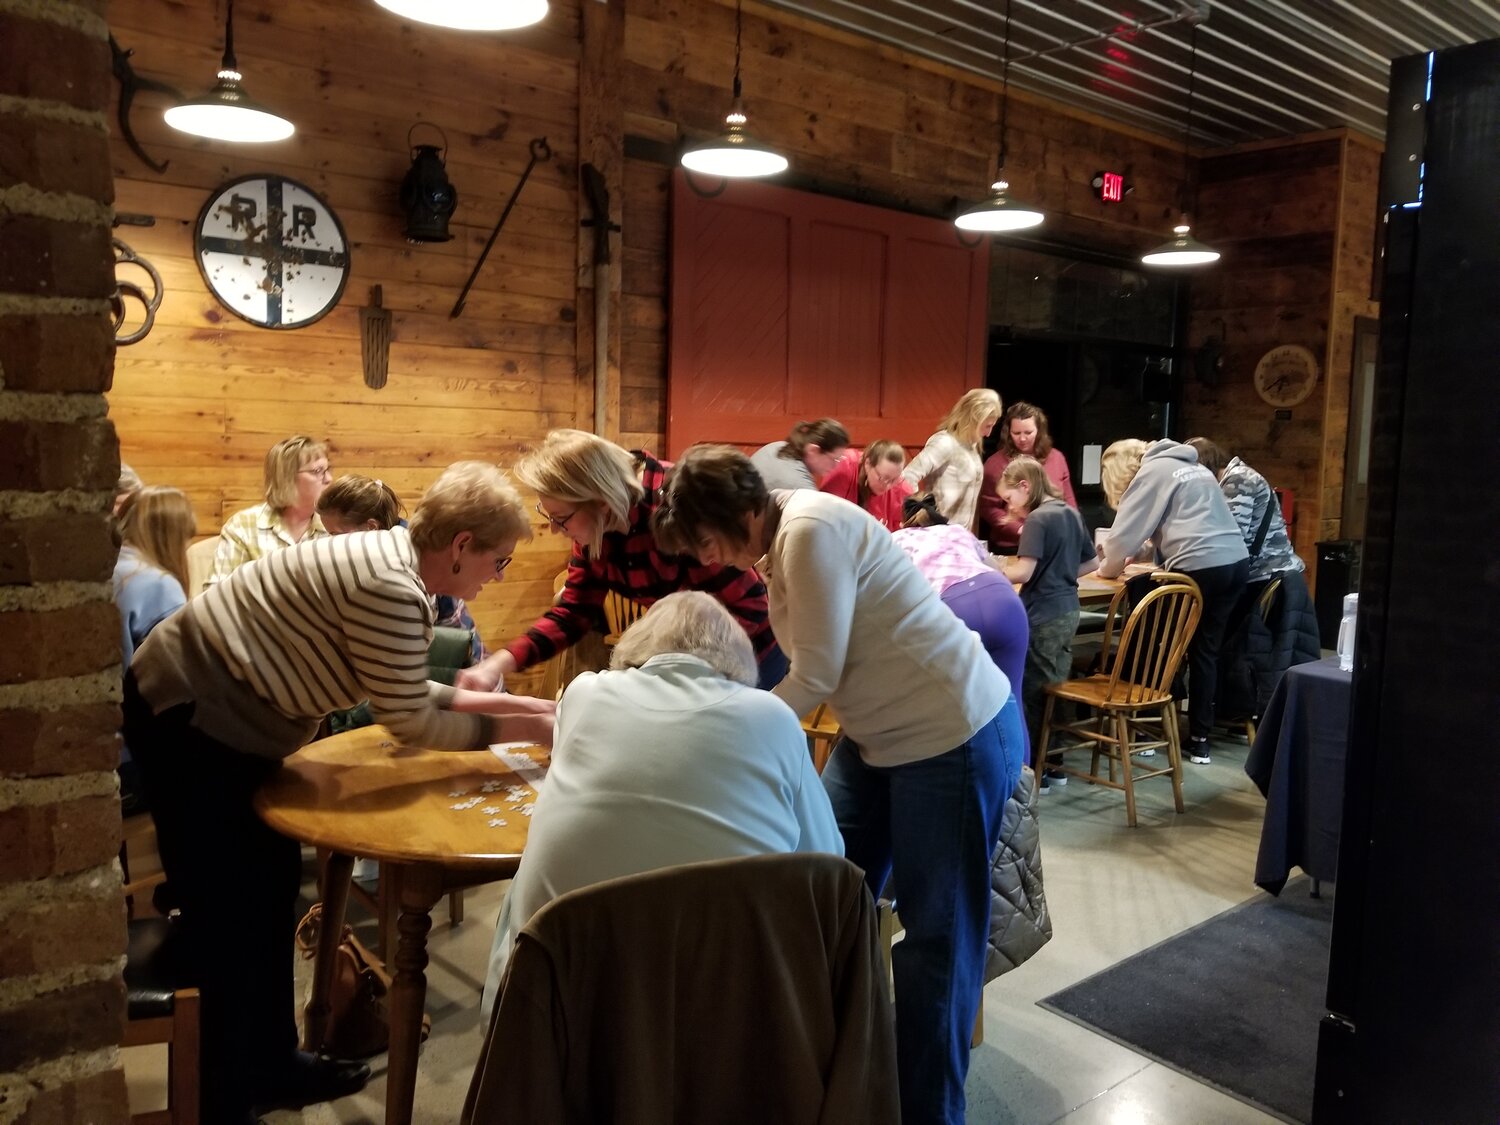 The Depot reached a maximum capacity of 10 teams for their first speed puzzling competition held on National puzzle day, January 29th.